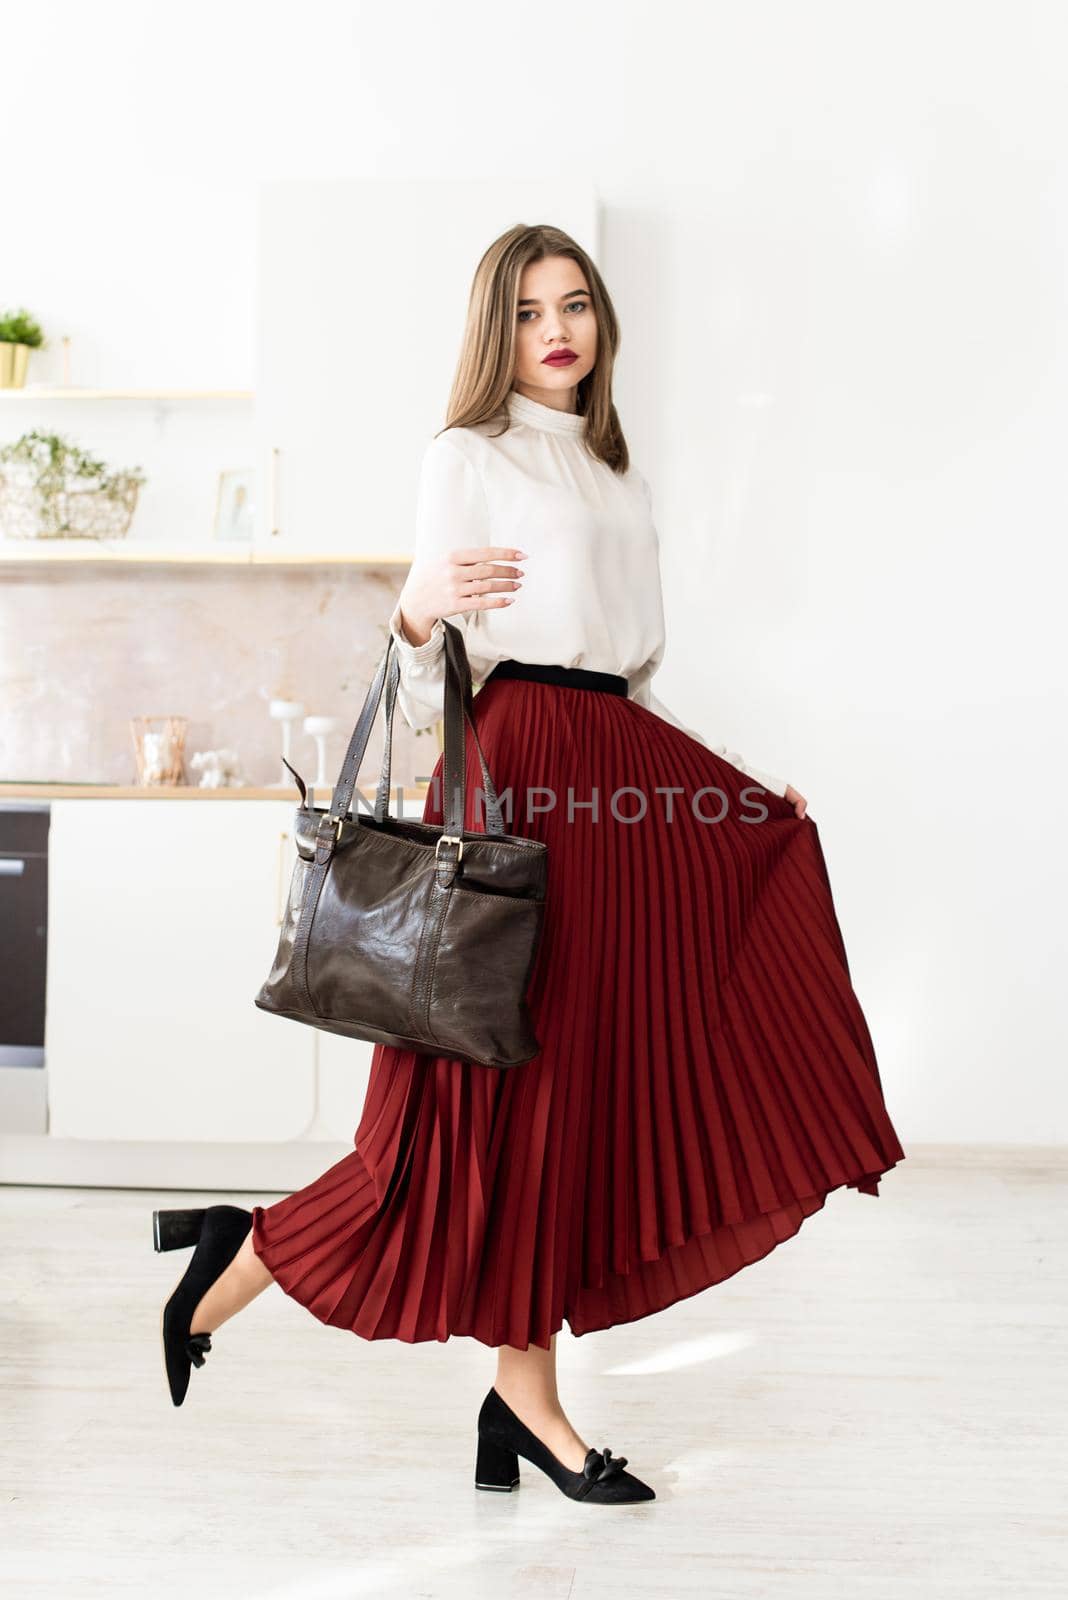 Portrait of fashionable women in a red skirt, white blouse and stylish suedeshoes with a buckle posing on the kitchen by Ashtray25